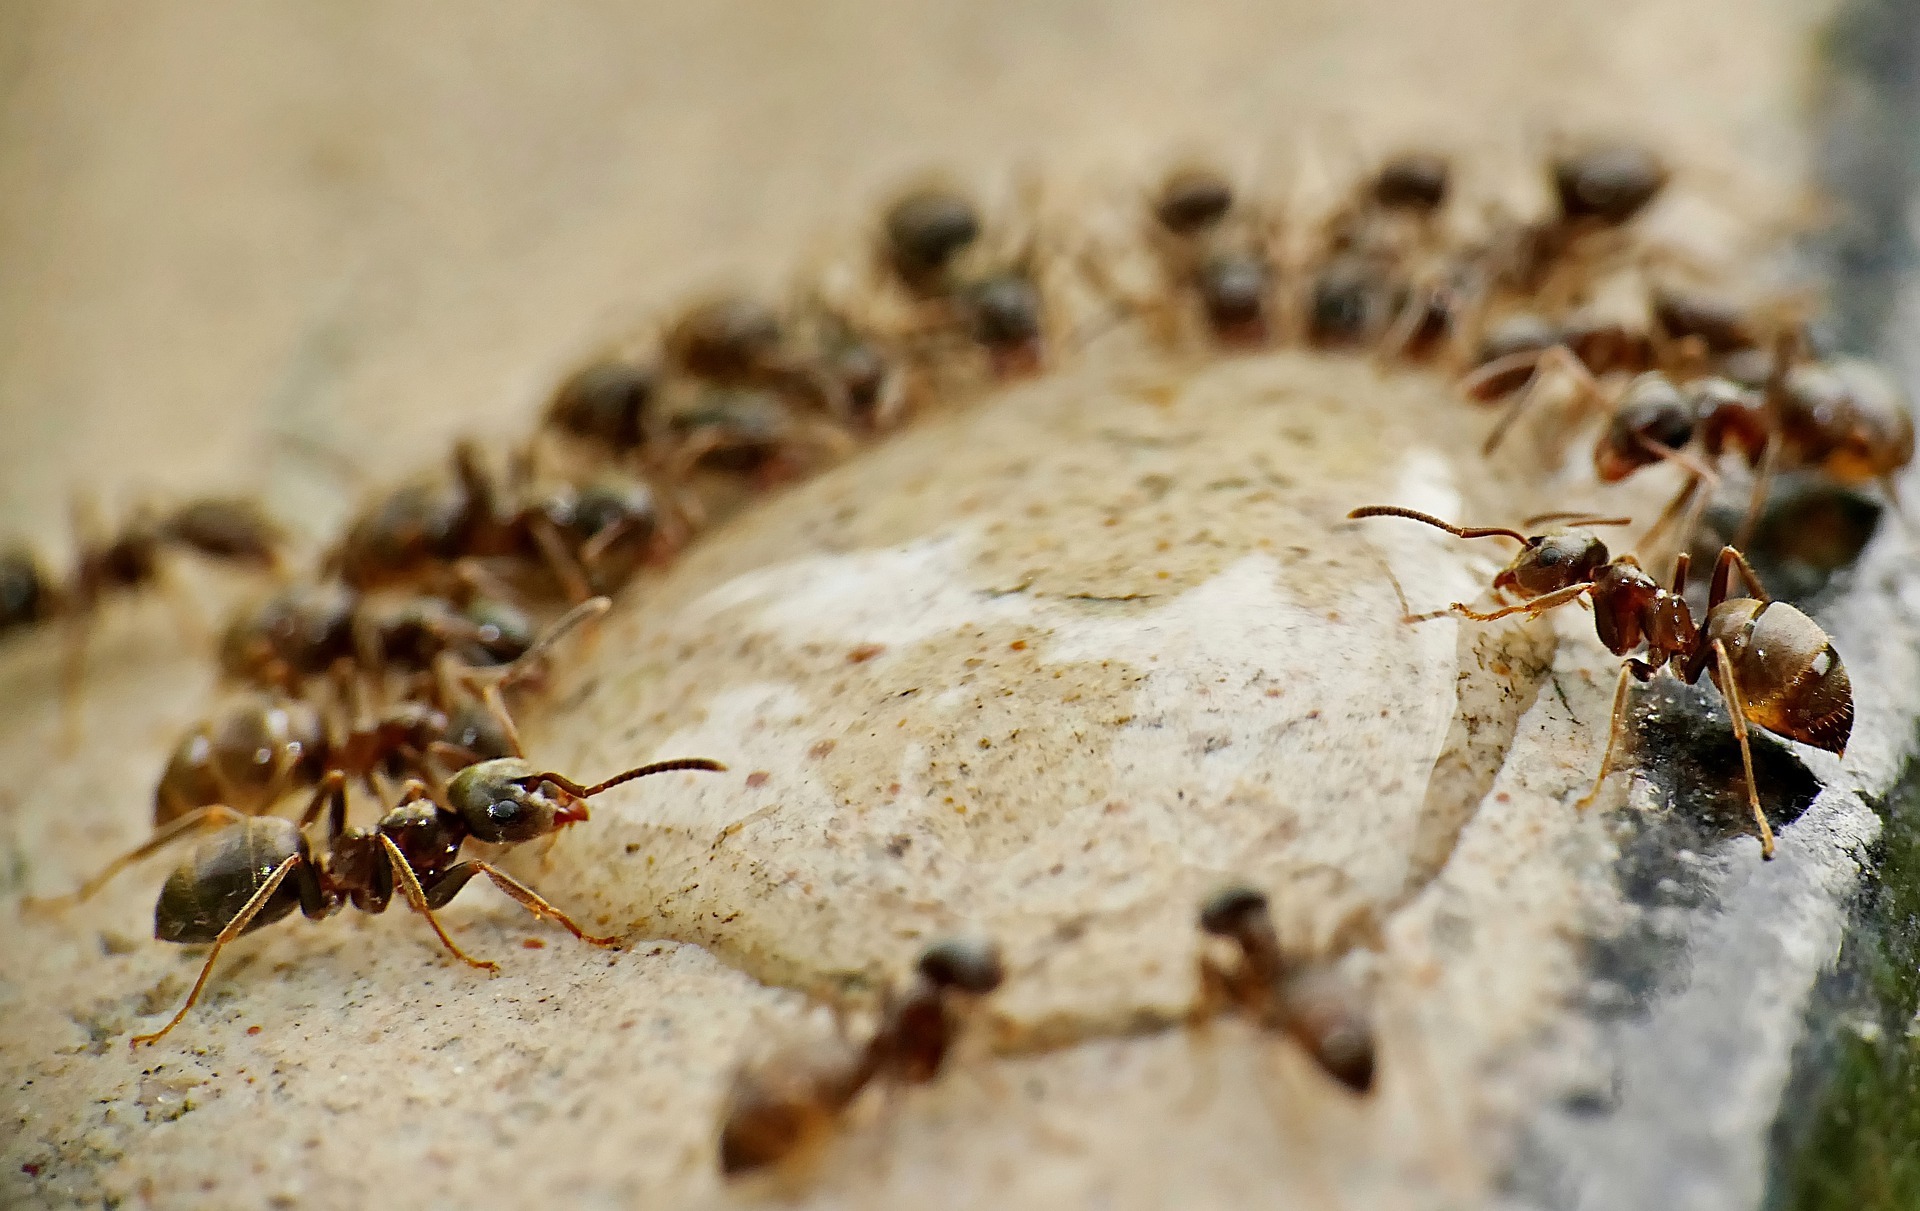 Ants invading homes can cause problems for homeowners.